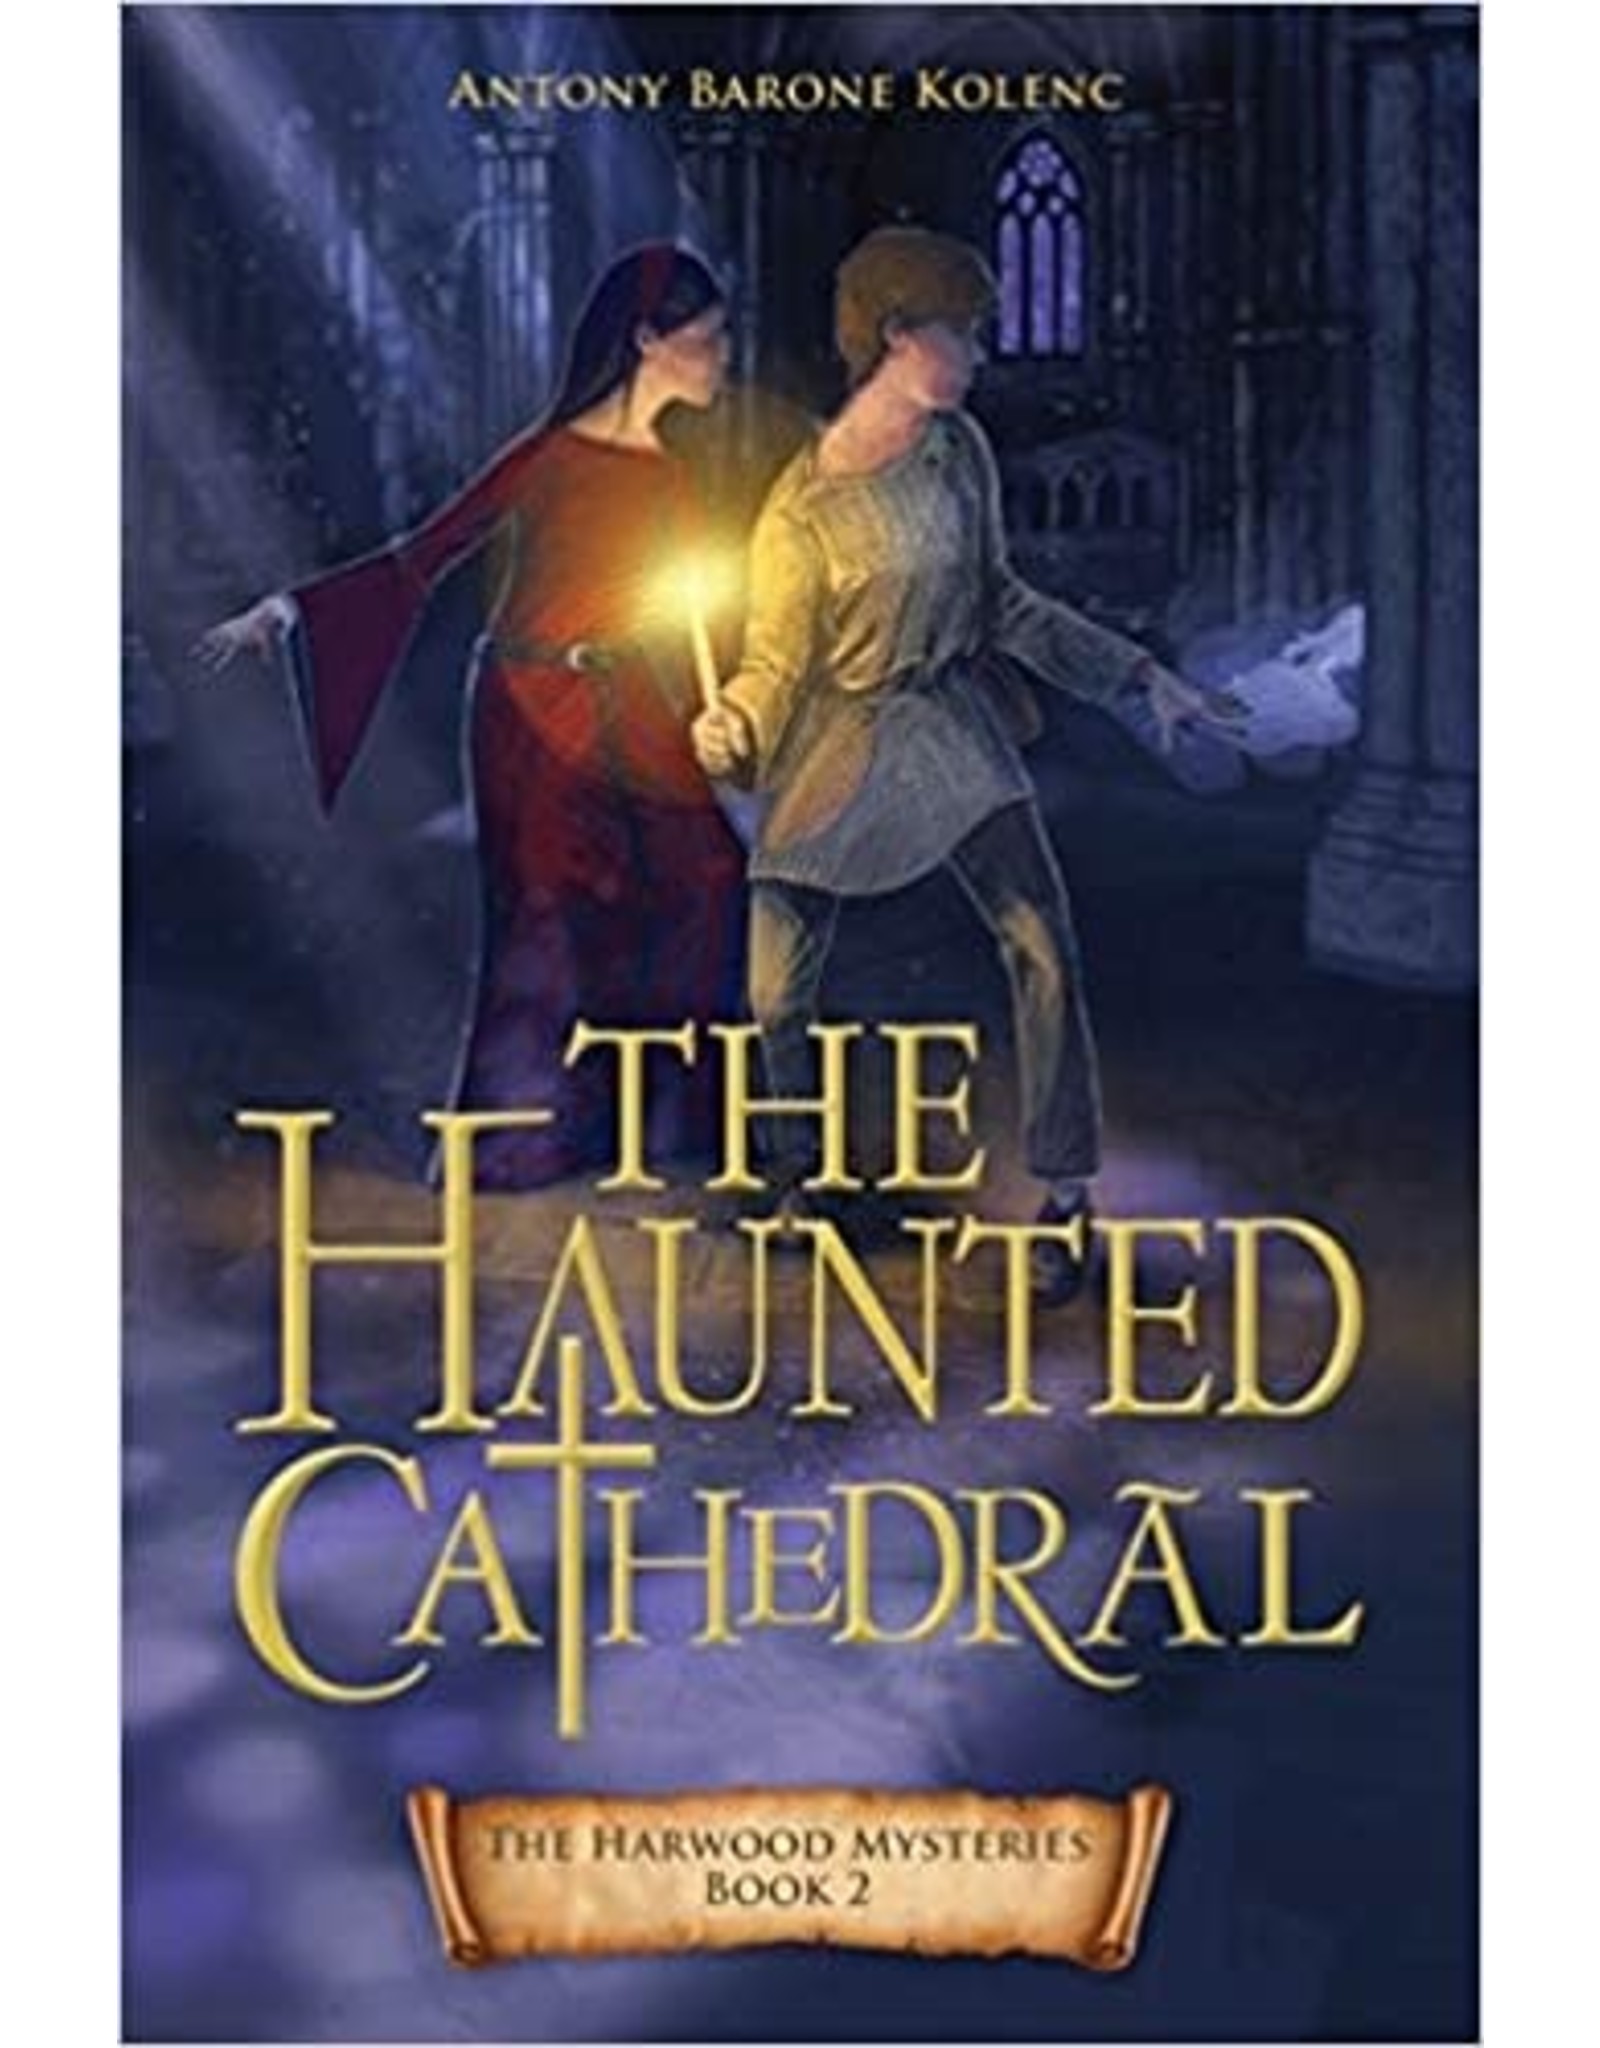 Loyola Press Haunted Cathedral (Harwood Mysteries Book 2)